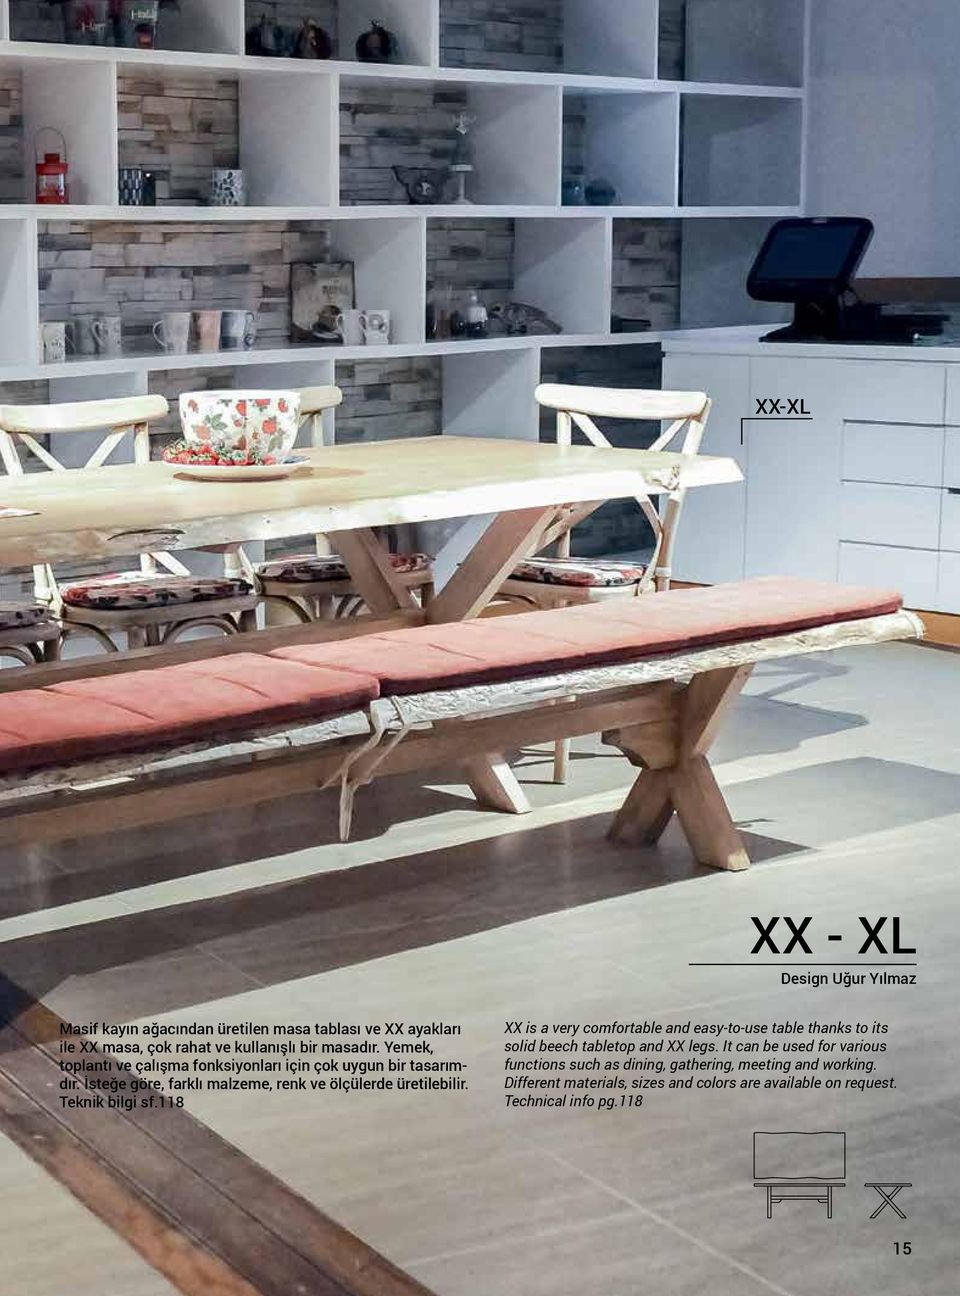 Teknik bilgi sf.118 XX is a very comfortable and easy-to-use table thanks to its solid beech tabletop and XX legs.